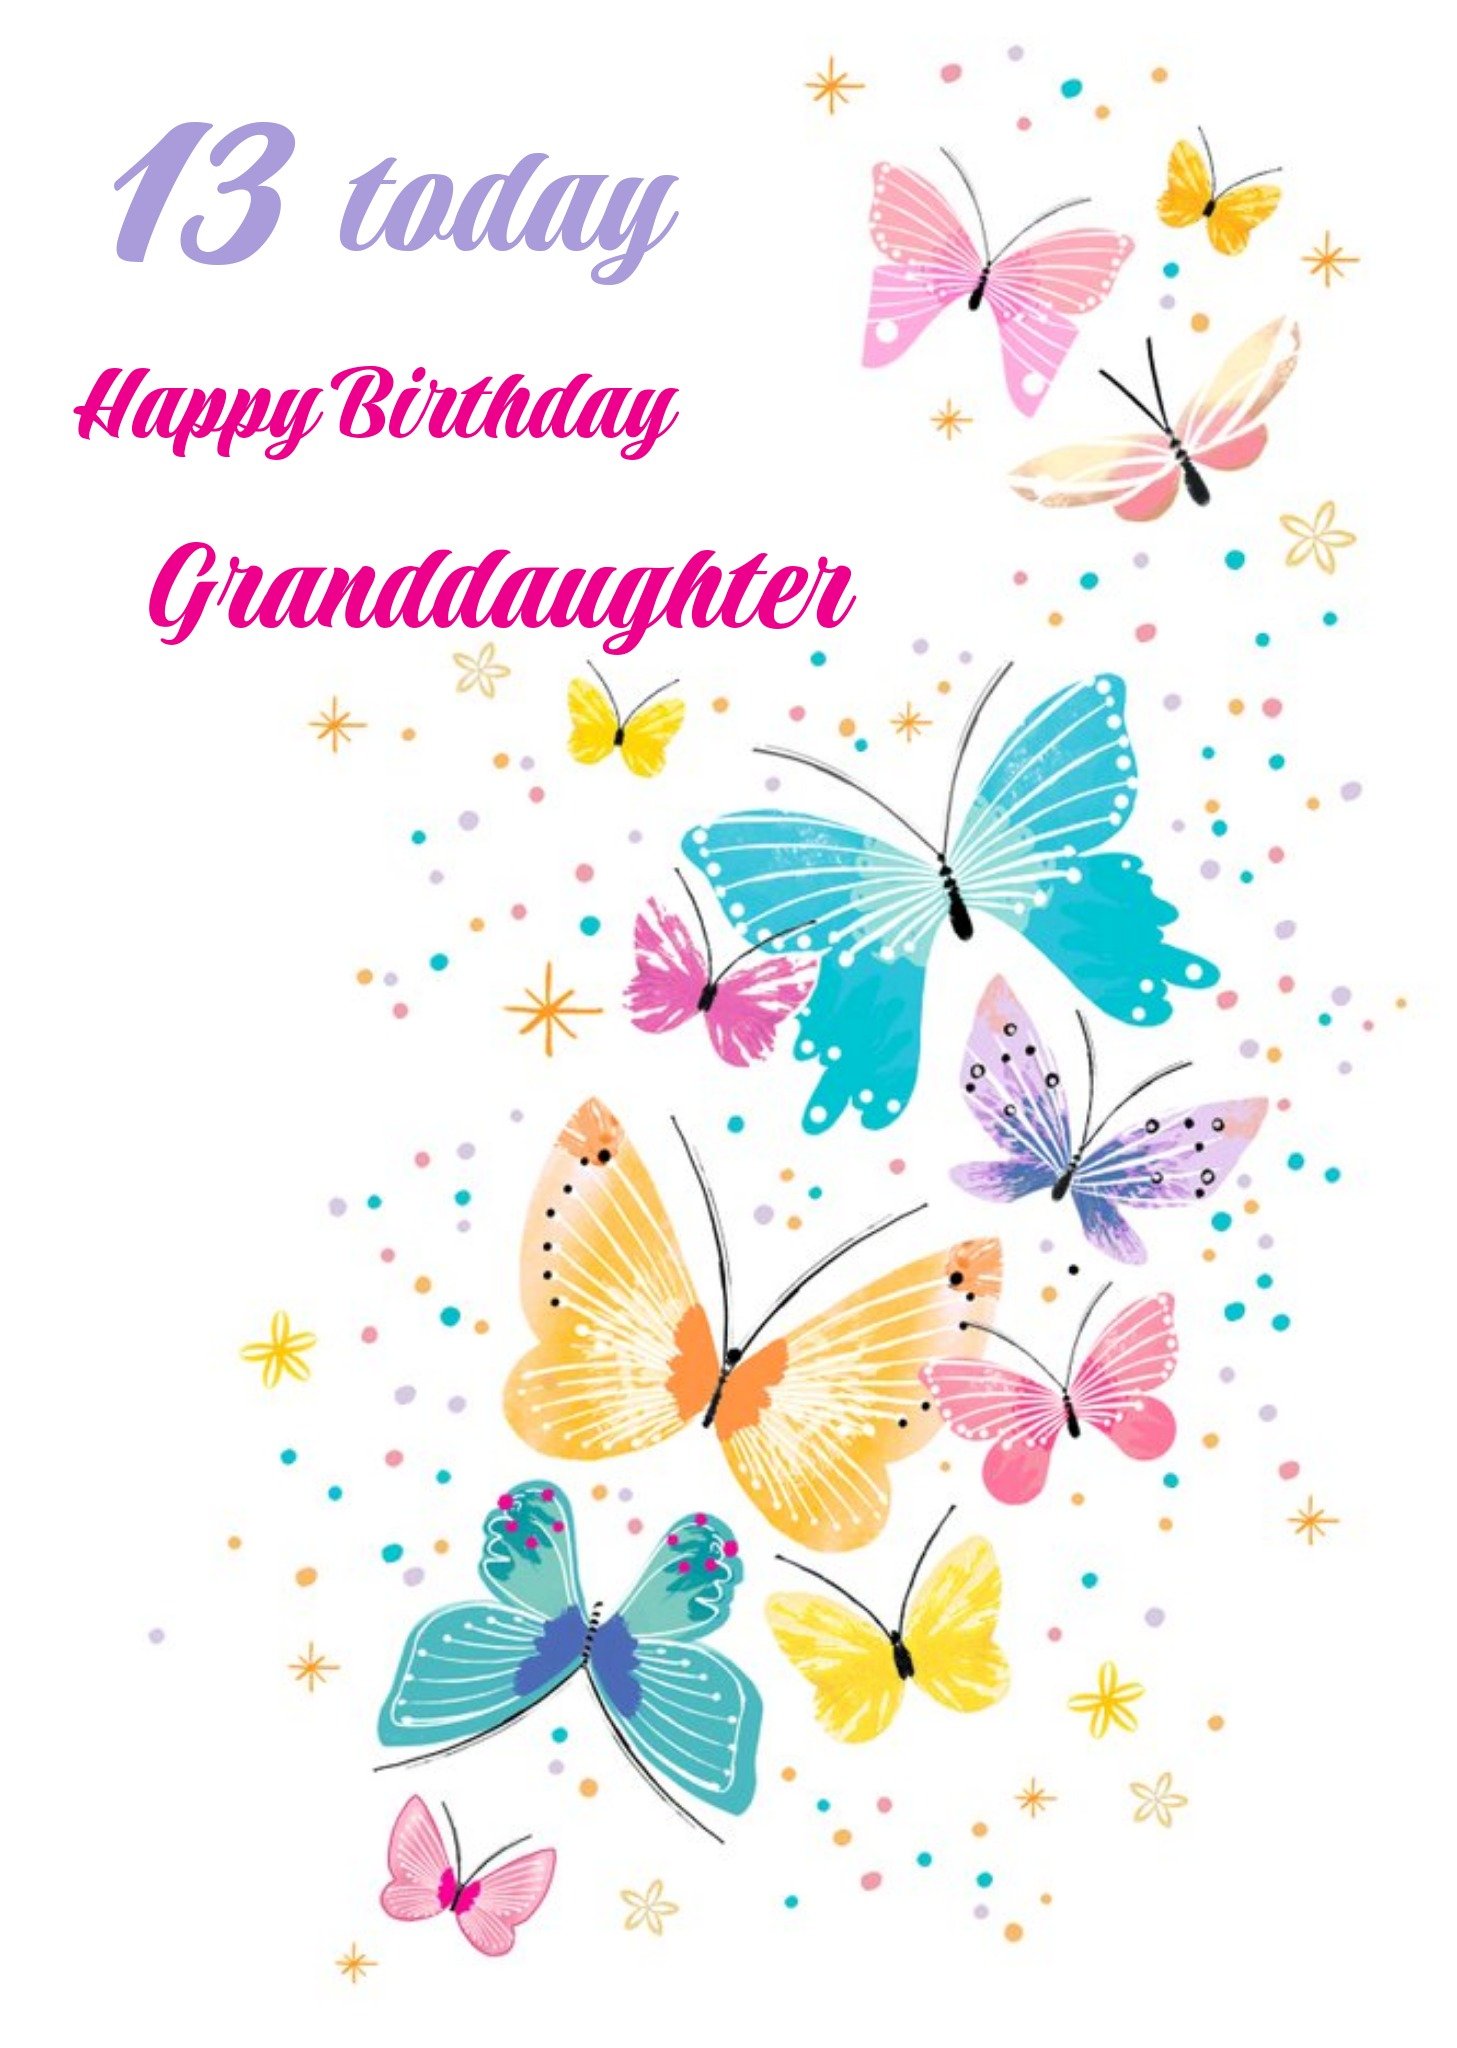 Moonpig Colourful Butterflies Flutter By 13 Today Birthday Card From Paperlink Ecard